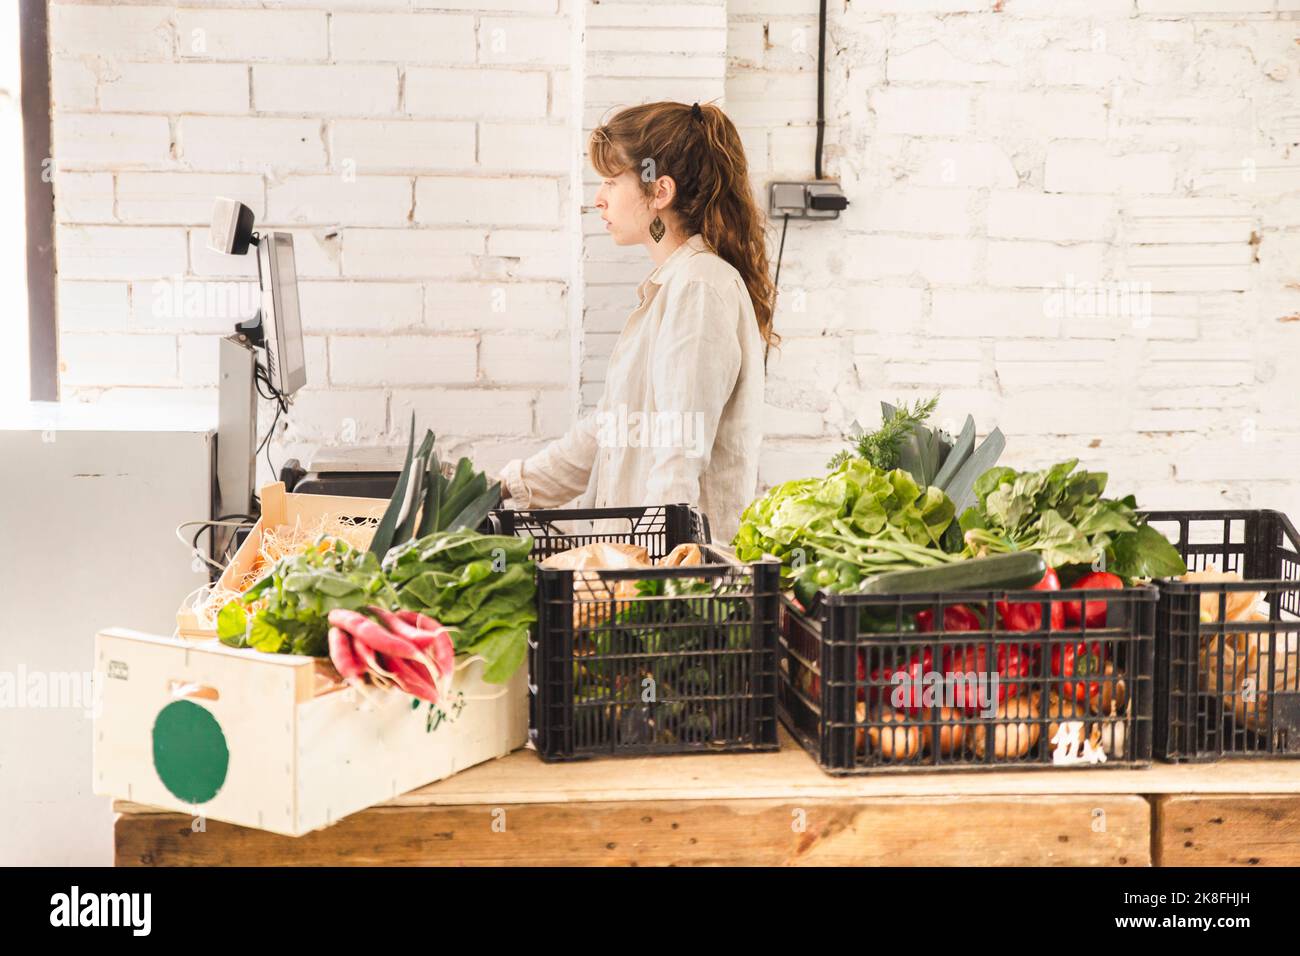 Grocer using weight scale in greengrocer shop Stock Photo